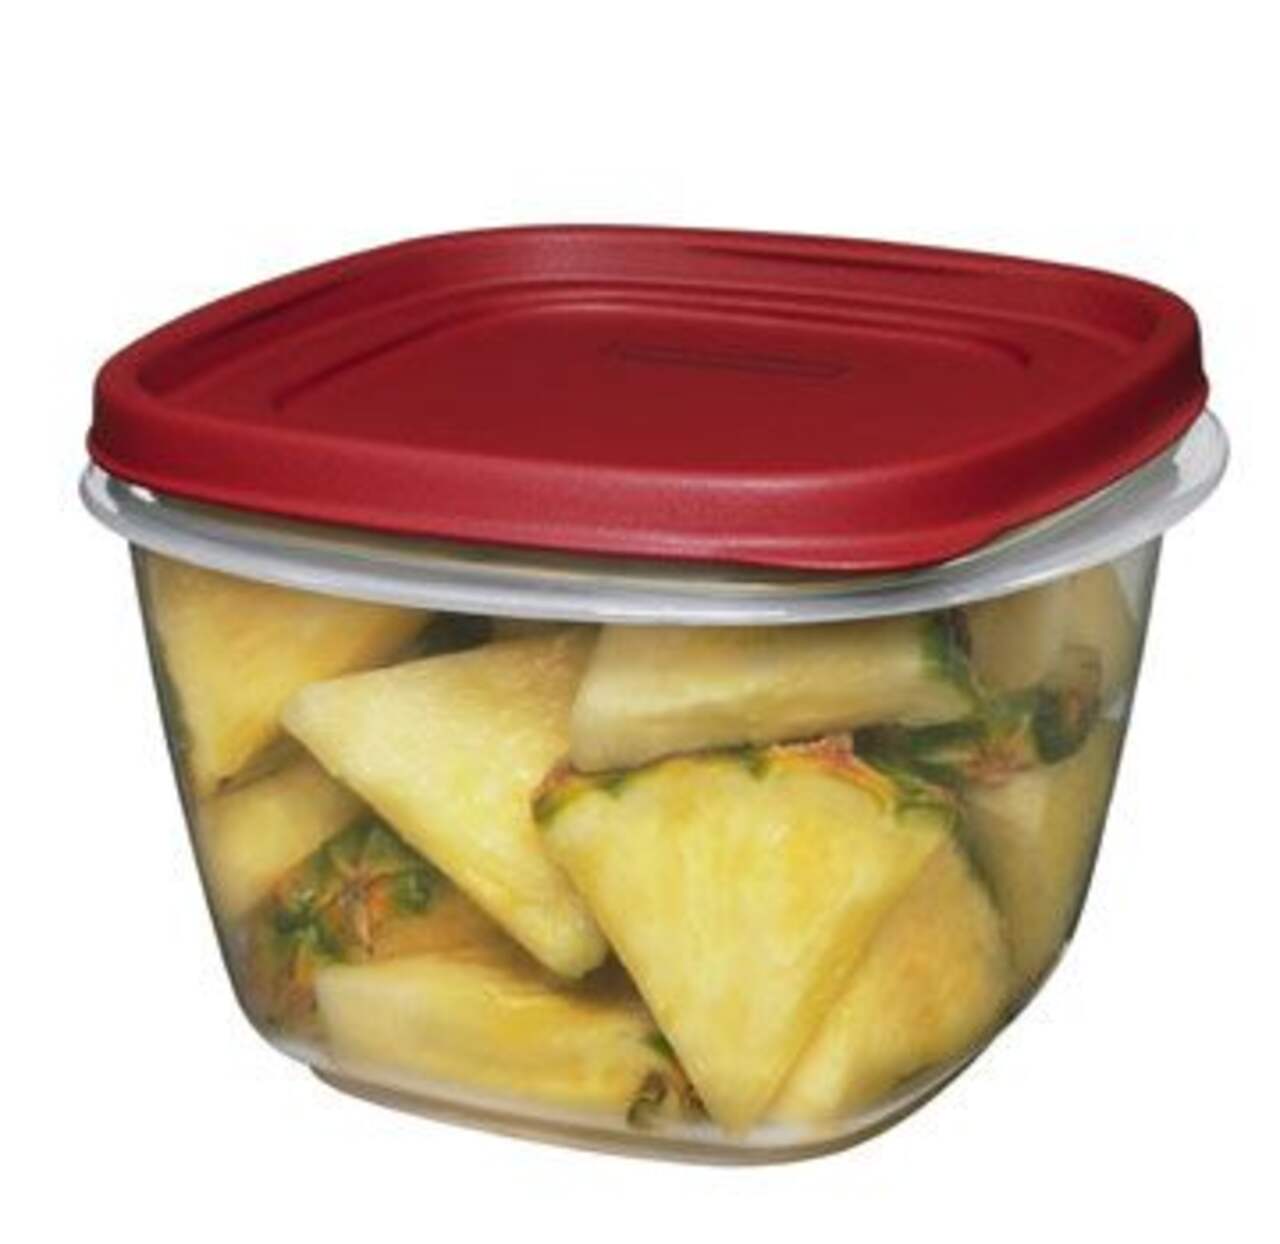 https://media-www.canadiantire.ca/product/living/kitchen/food-storage/0428913/rubbermaid-easyfind-lid-7-cup-square-f4078b75-6c0d-4449-83be-7e393c7fd7e3-jpgrendition.jpg?imdensity=1&imwidth=640&impolicy=mZoom